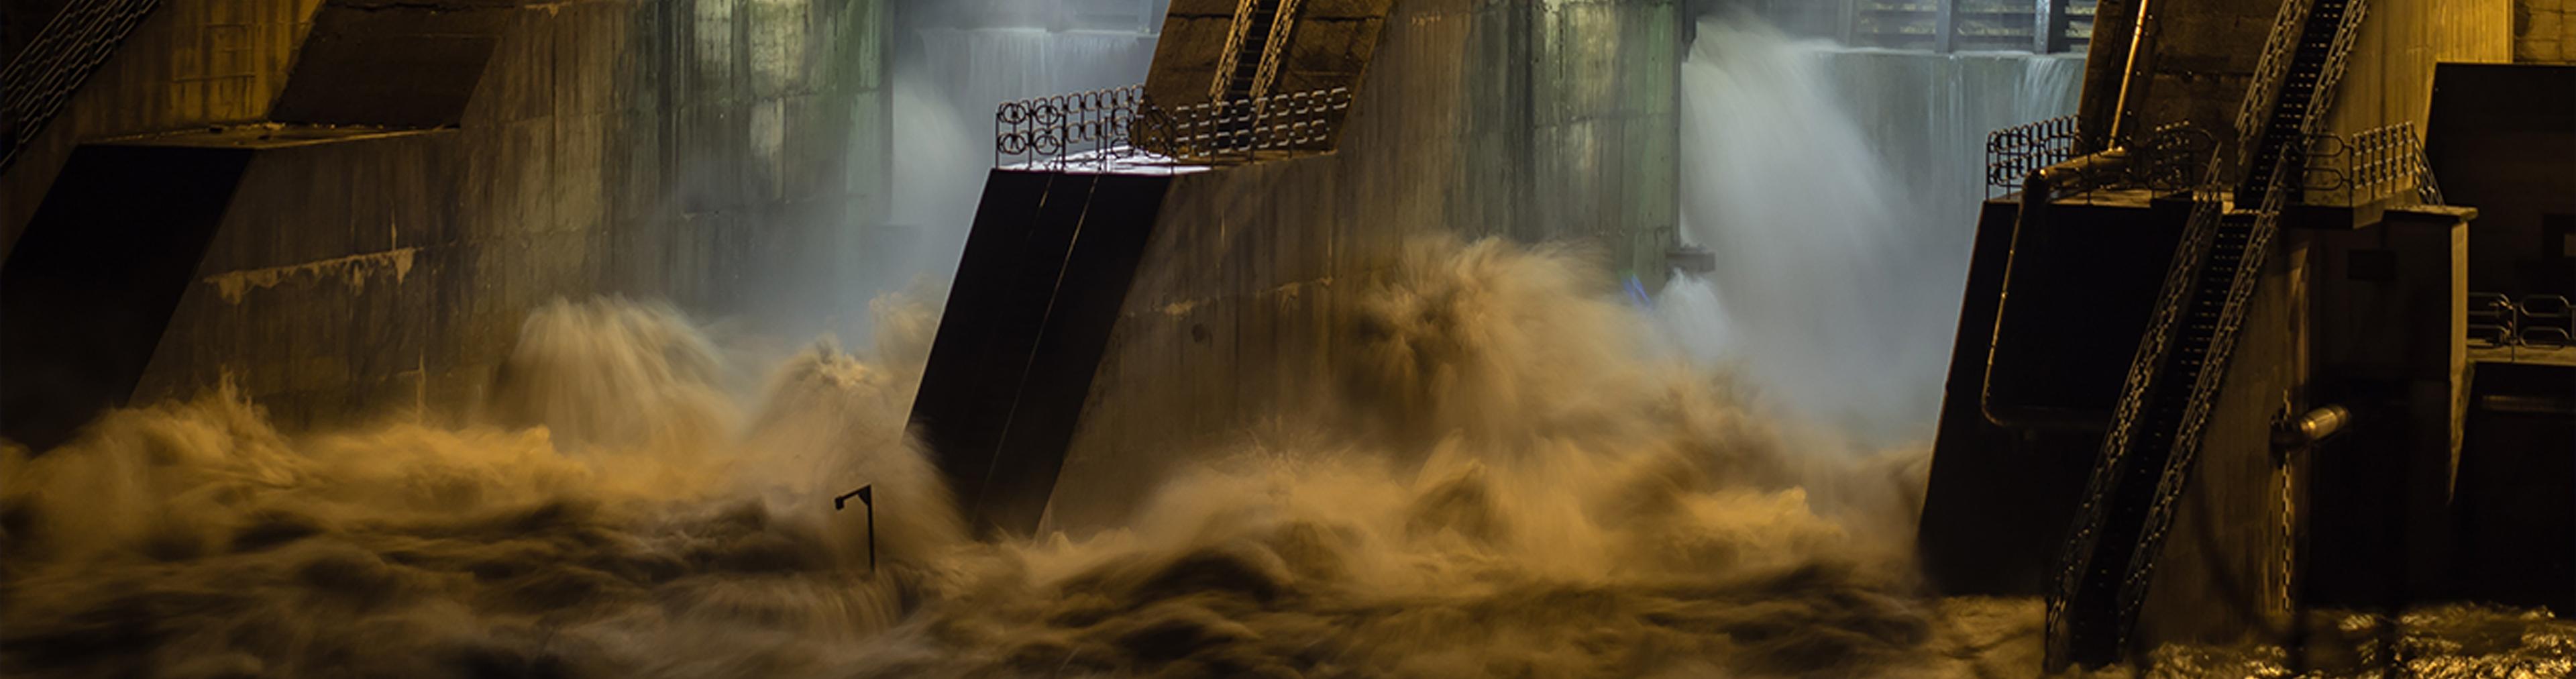 Product Complete solutions for hydropower plants - SOLUTIONS image